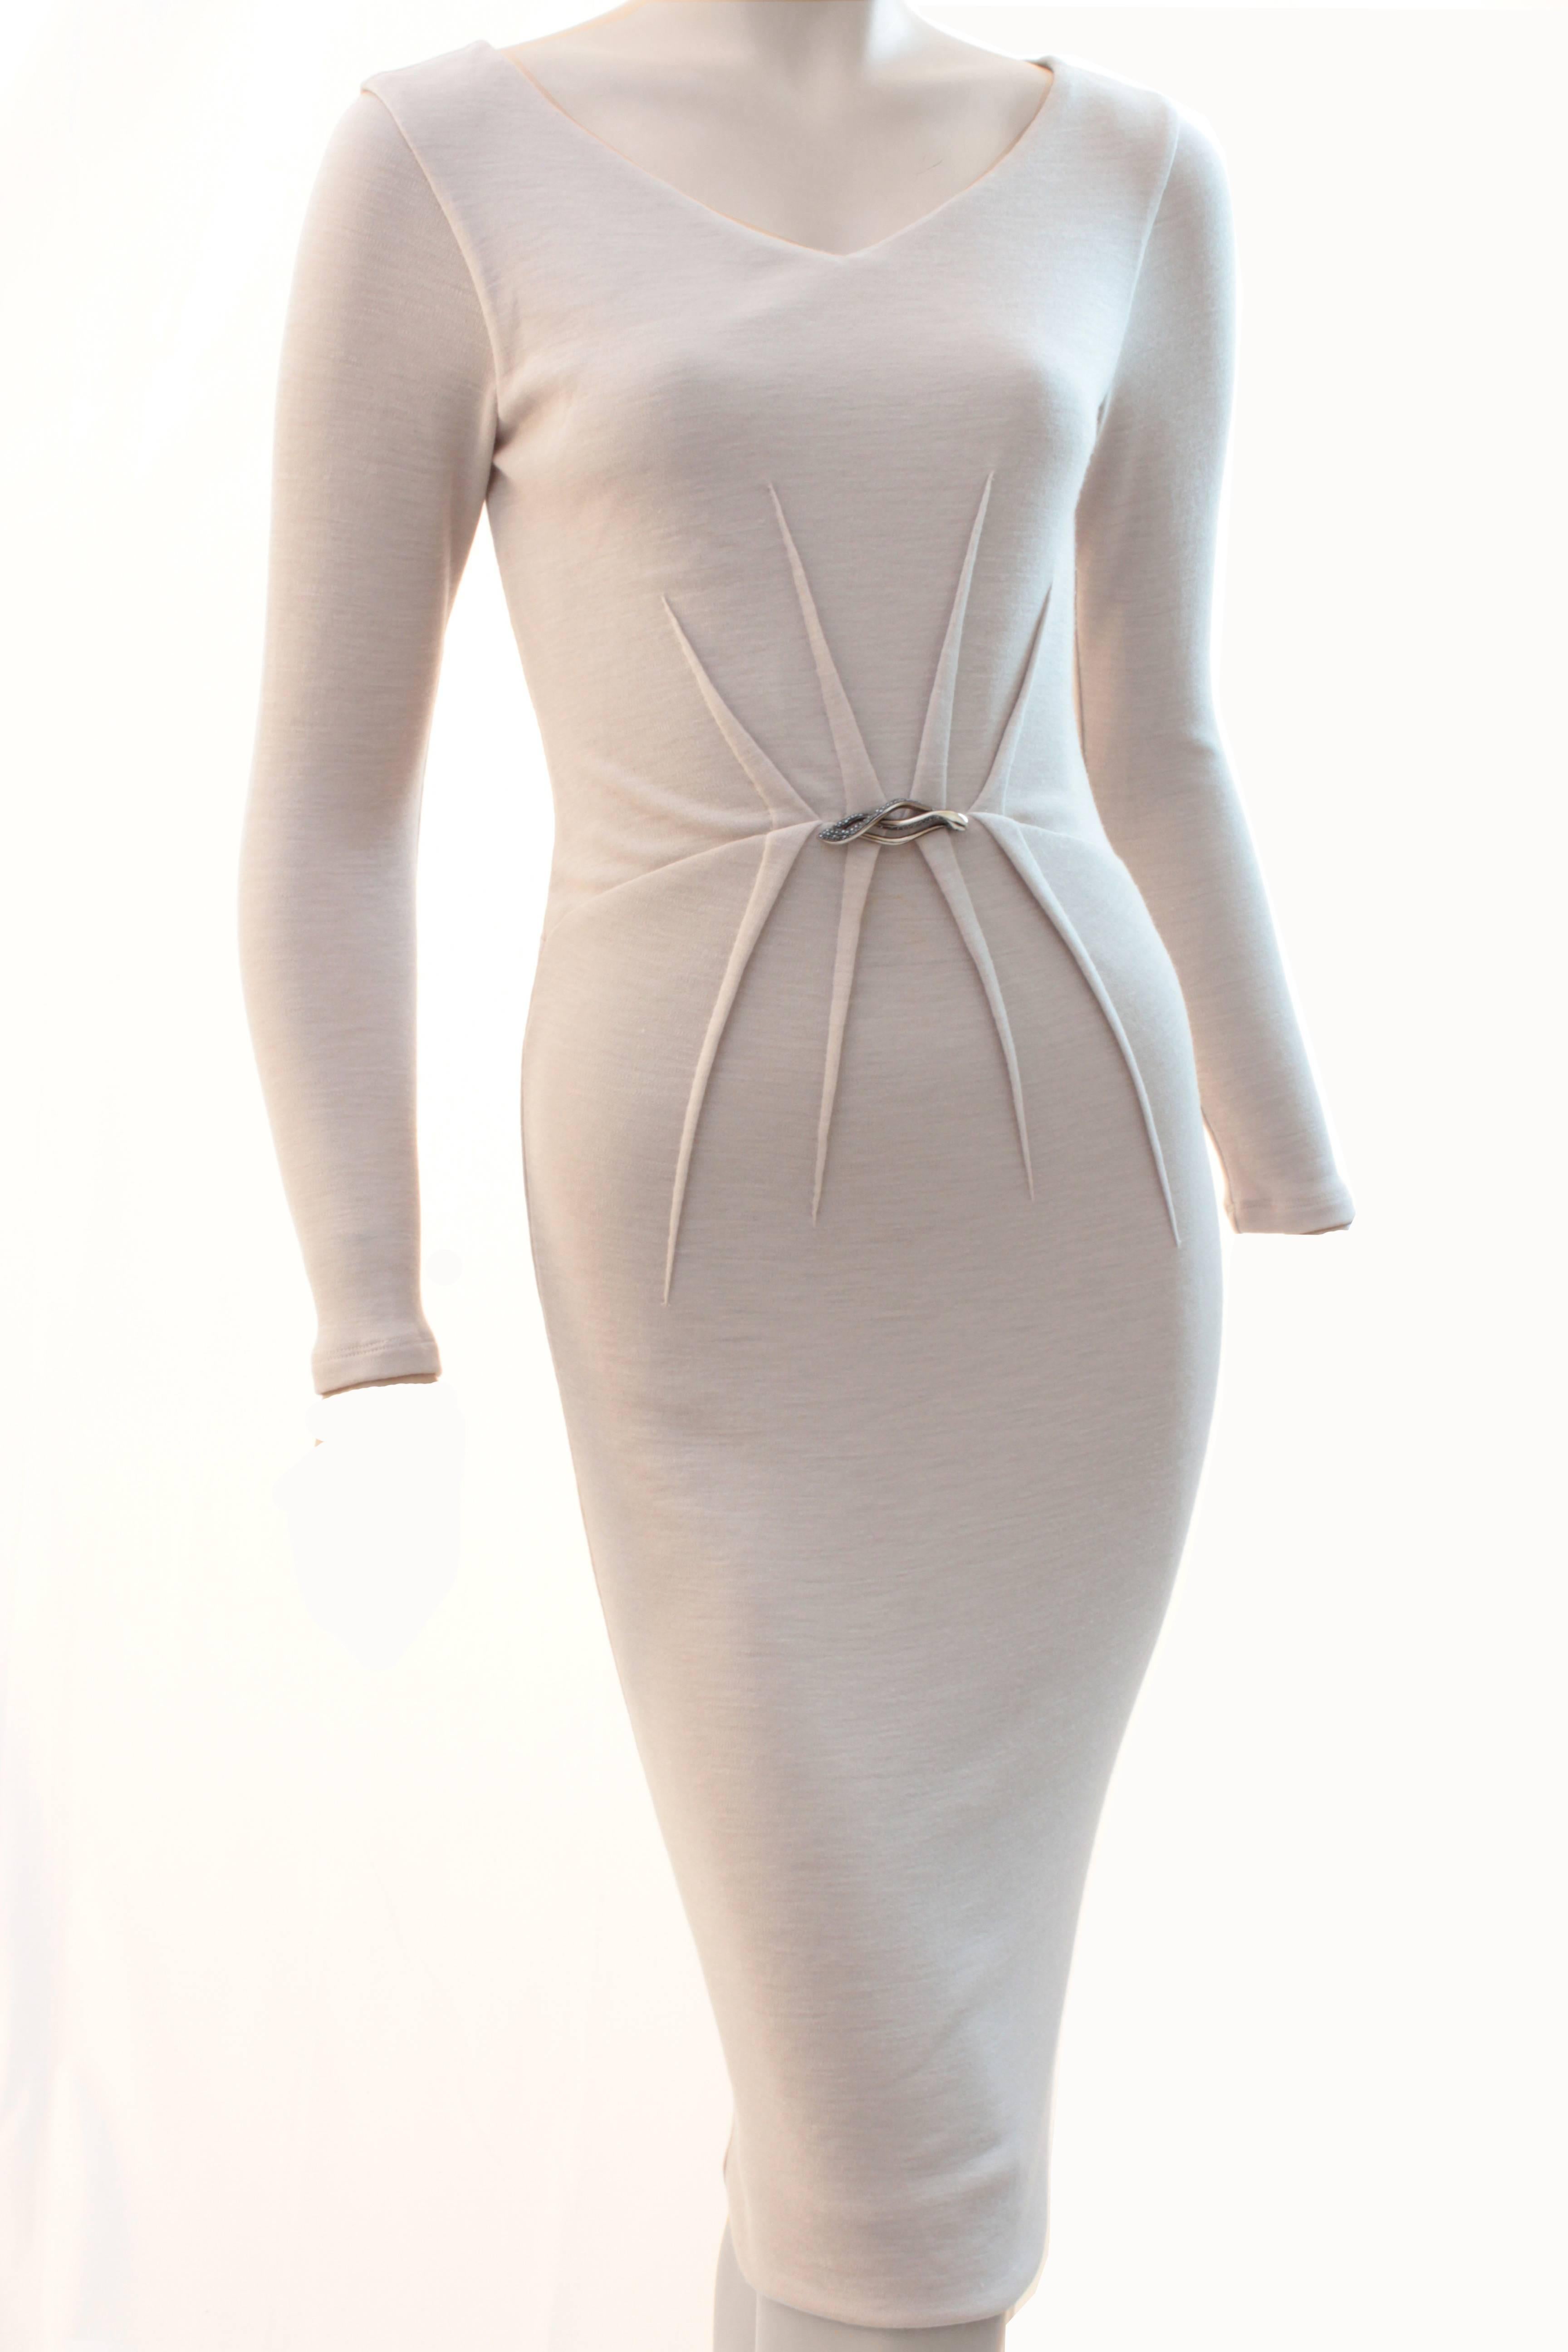 Here's a sexy little dress from Roberto Cavalli! Made from a creme colored wool/polyamide blend knit, it features a v-neck, a cinched waist with sewn-in pleating detail and a silver and rhinestone embellished piece in front.  Fully-lined, it fastens